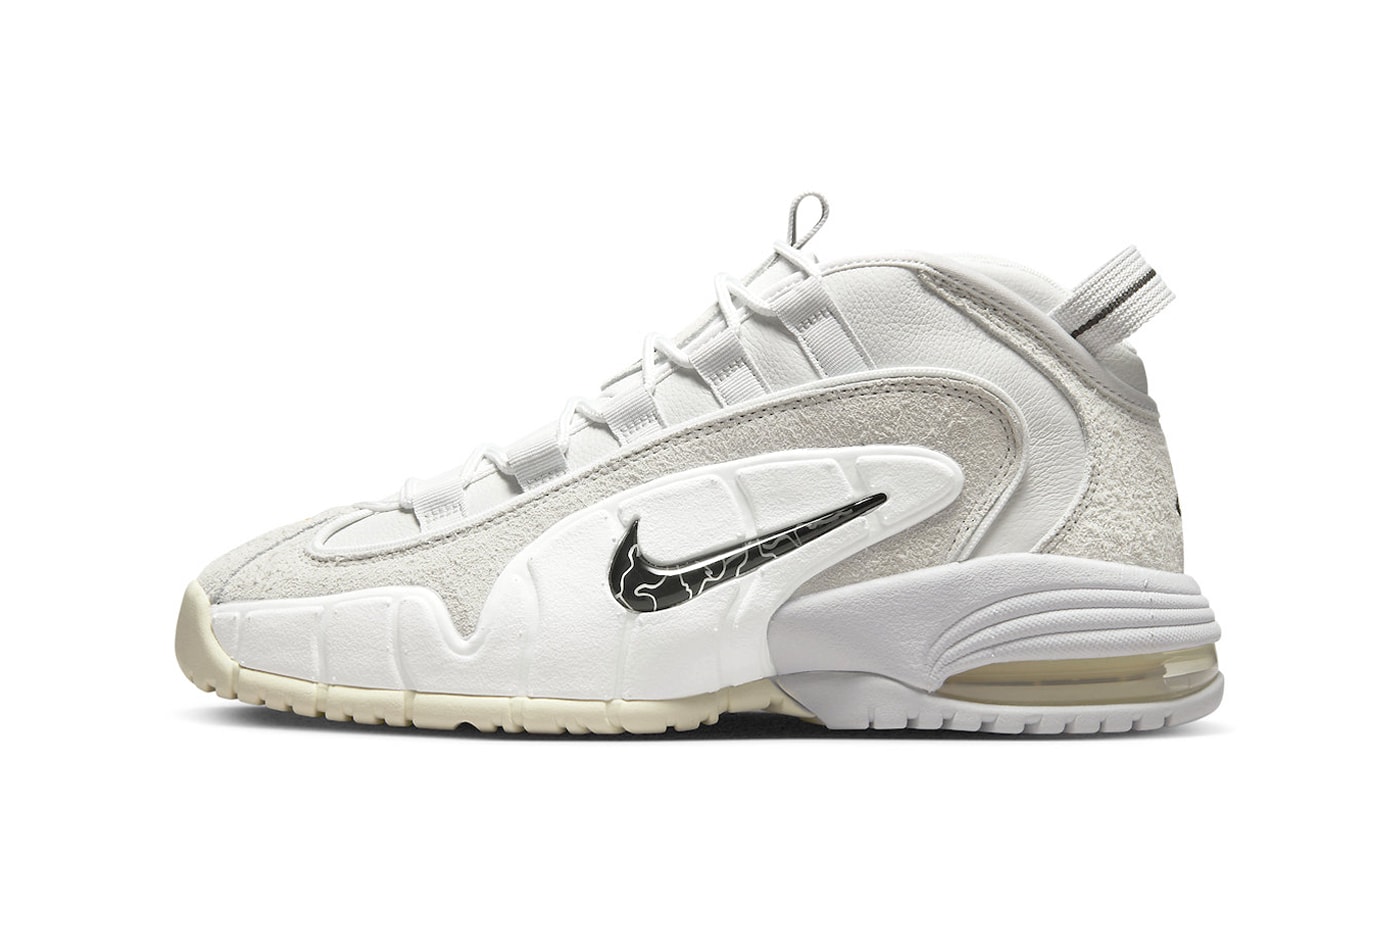 ACES Presents a 1-of-1 Nike Air Max Penny 1 Collaboration penny hardaway quavo nike lebron 7 pe